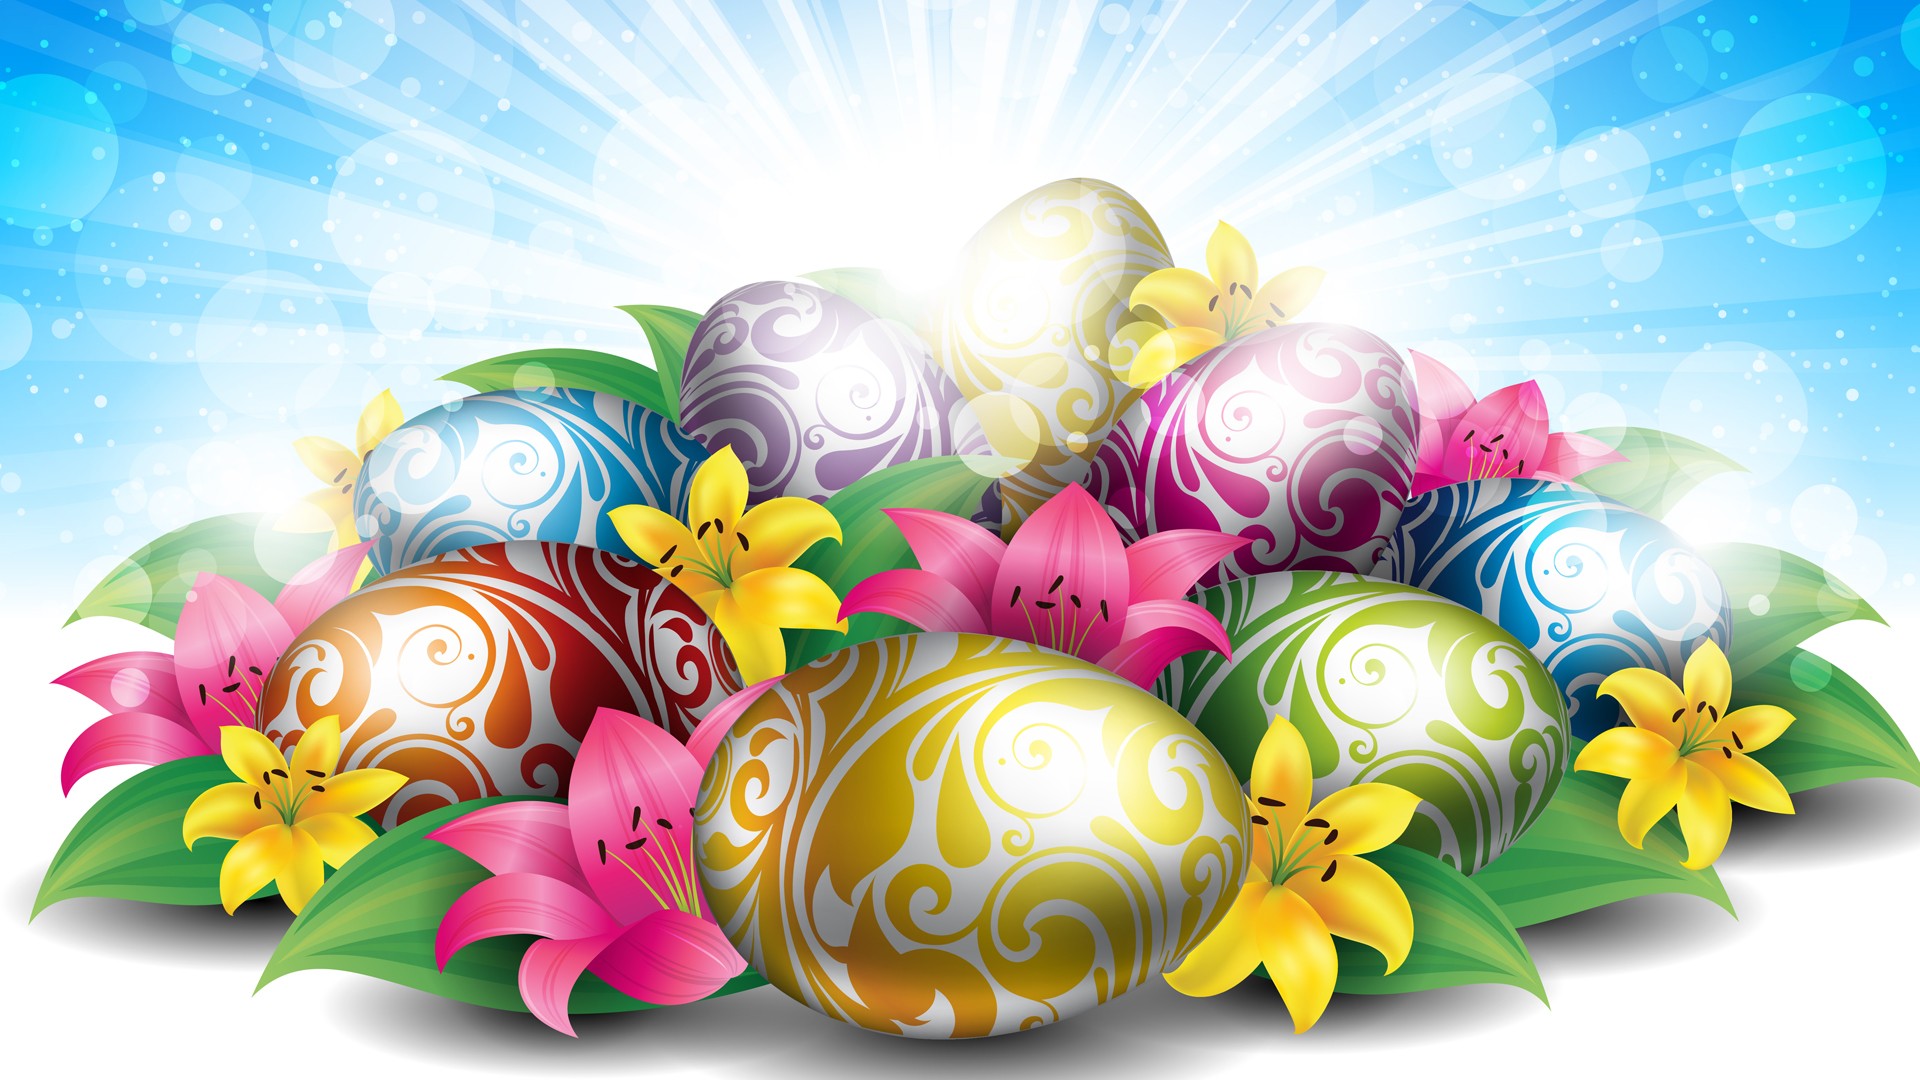 For Easter Background Wallpaper Your Desktop And Mobile Devices